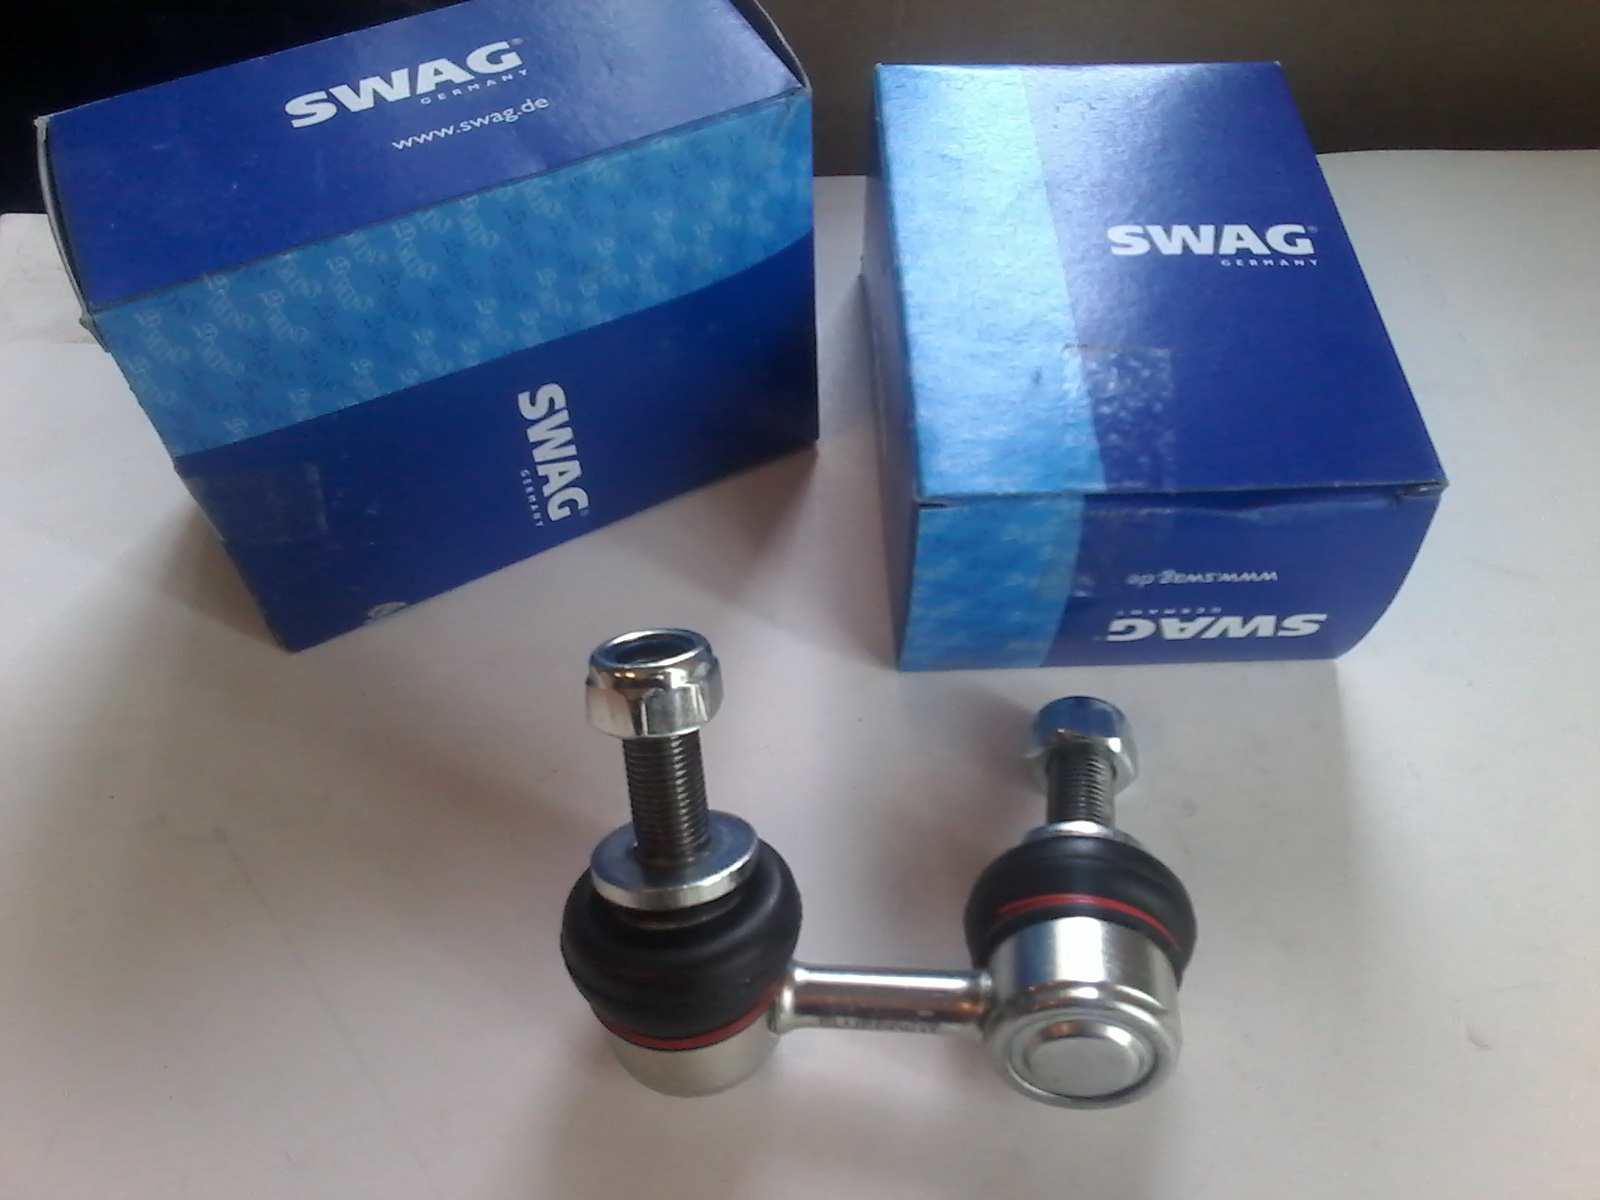  SWAG ()